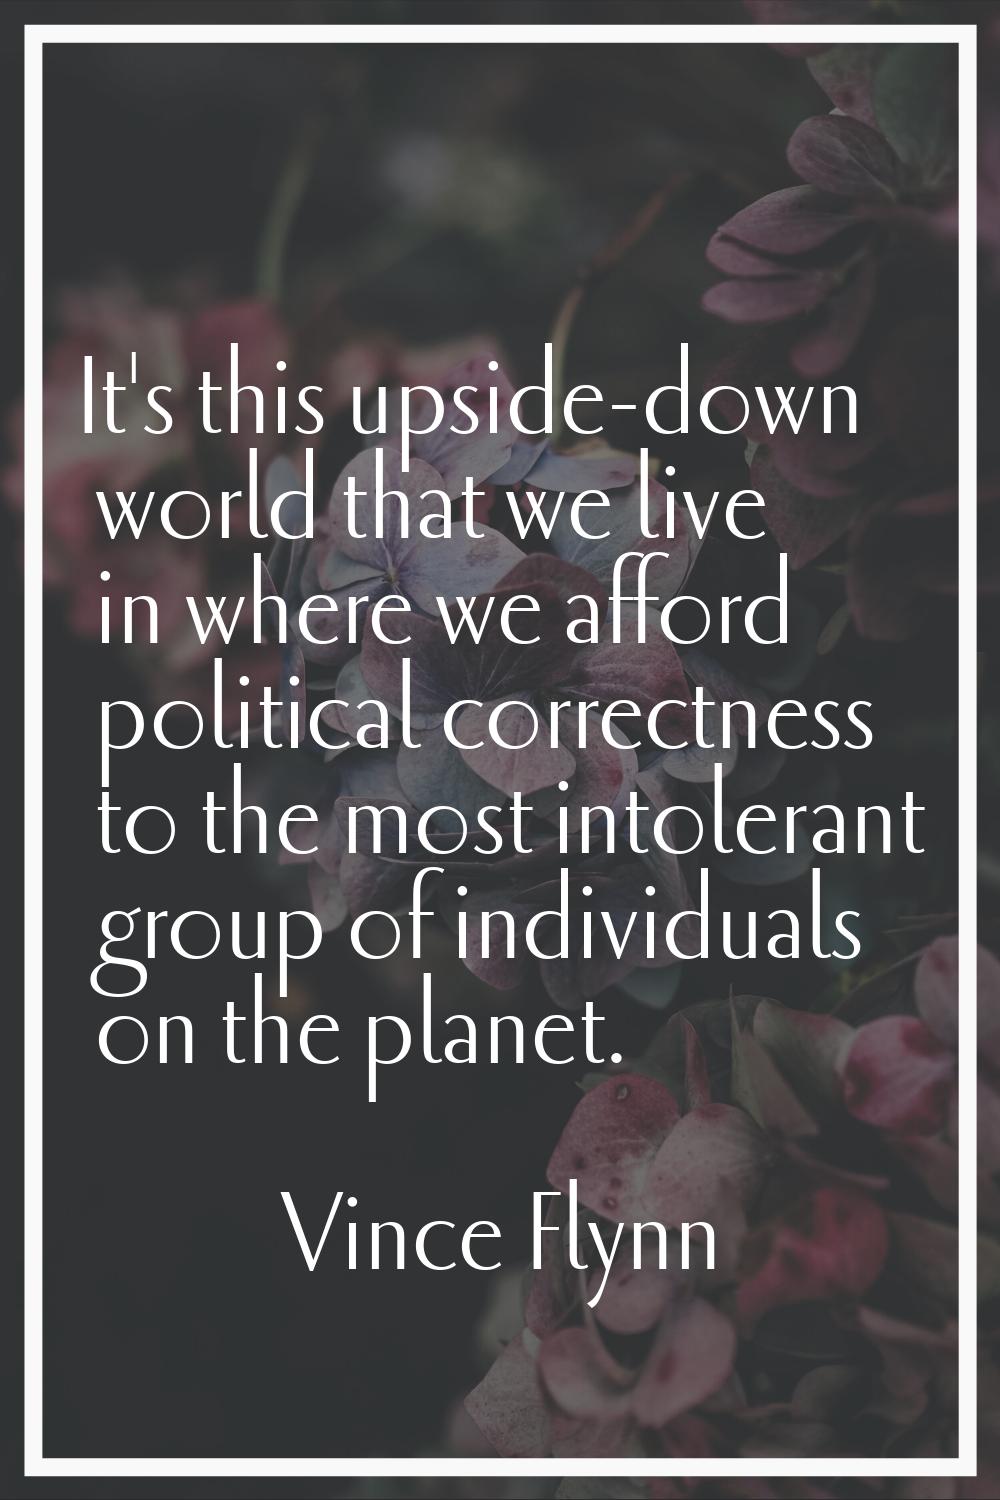 It's this upside-down world that we live in where we afford political correctness to the most intol